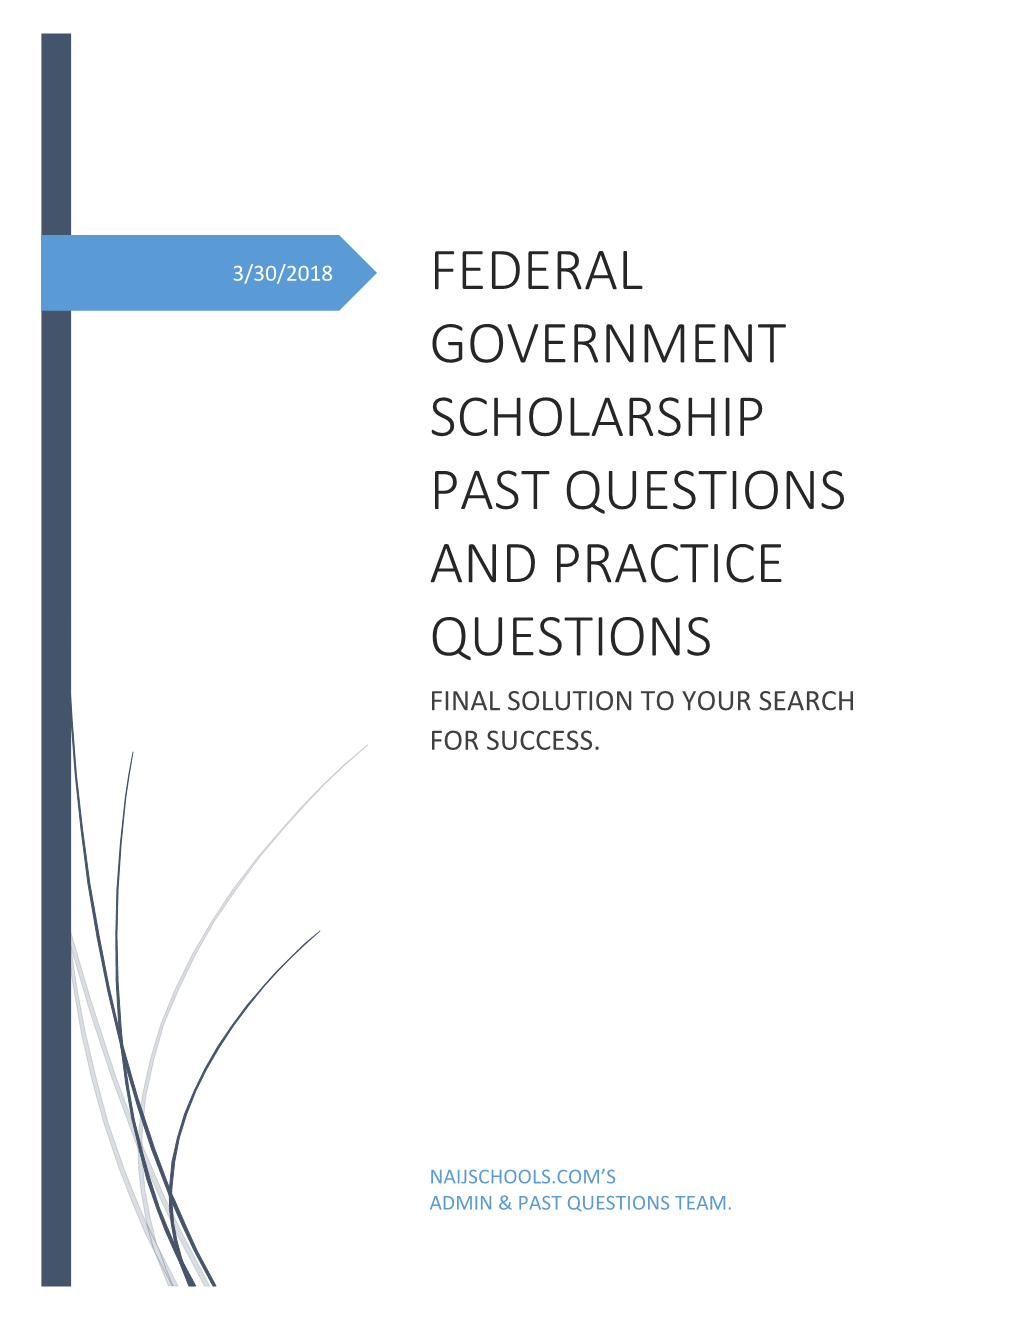 Federal Government Scholarship Past Questions and Practice Questions Final Solution to Your Search for Success